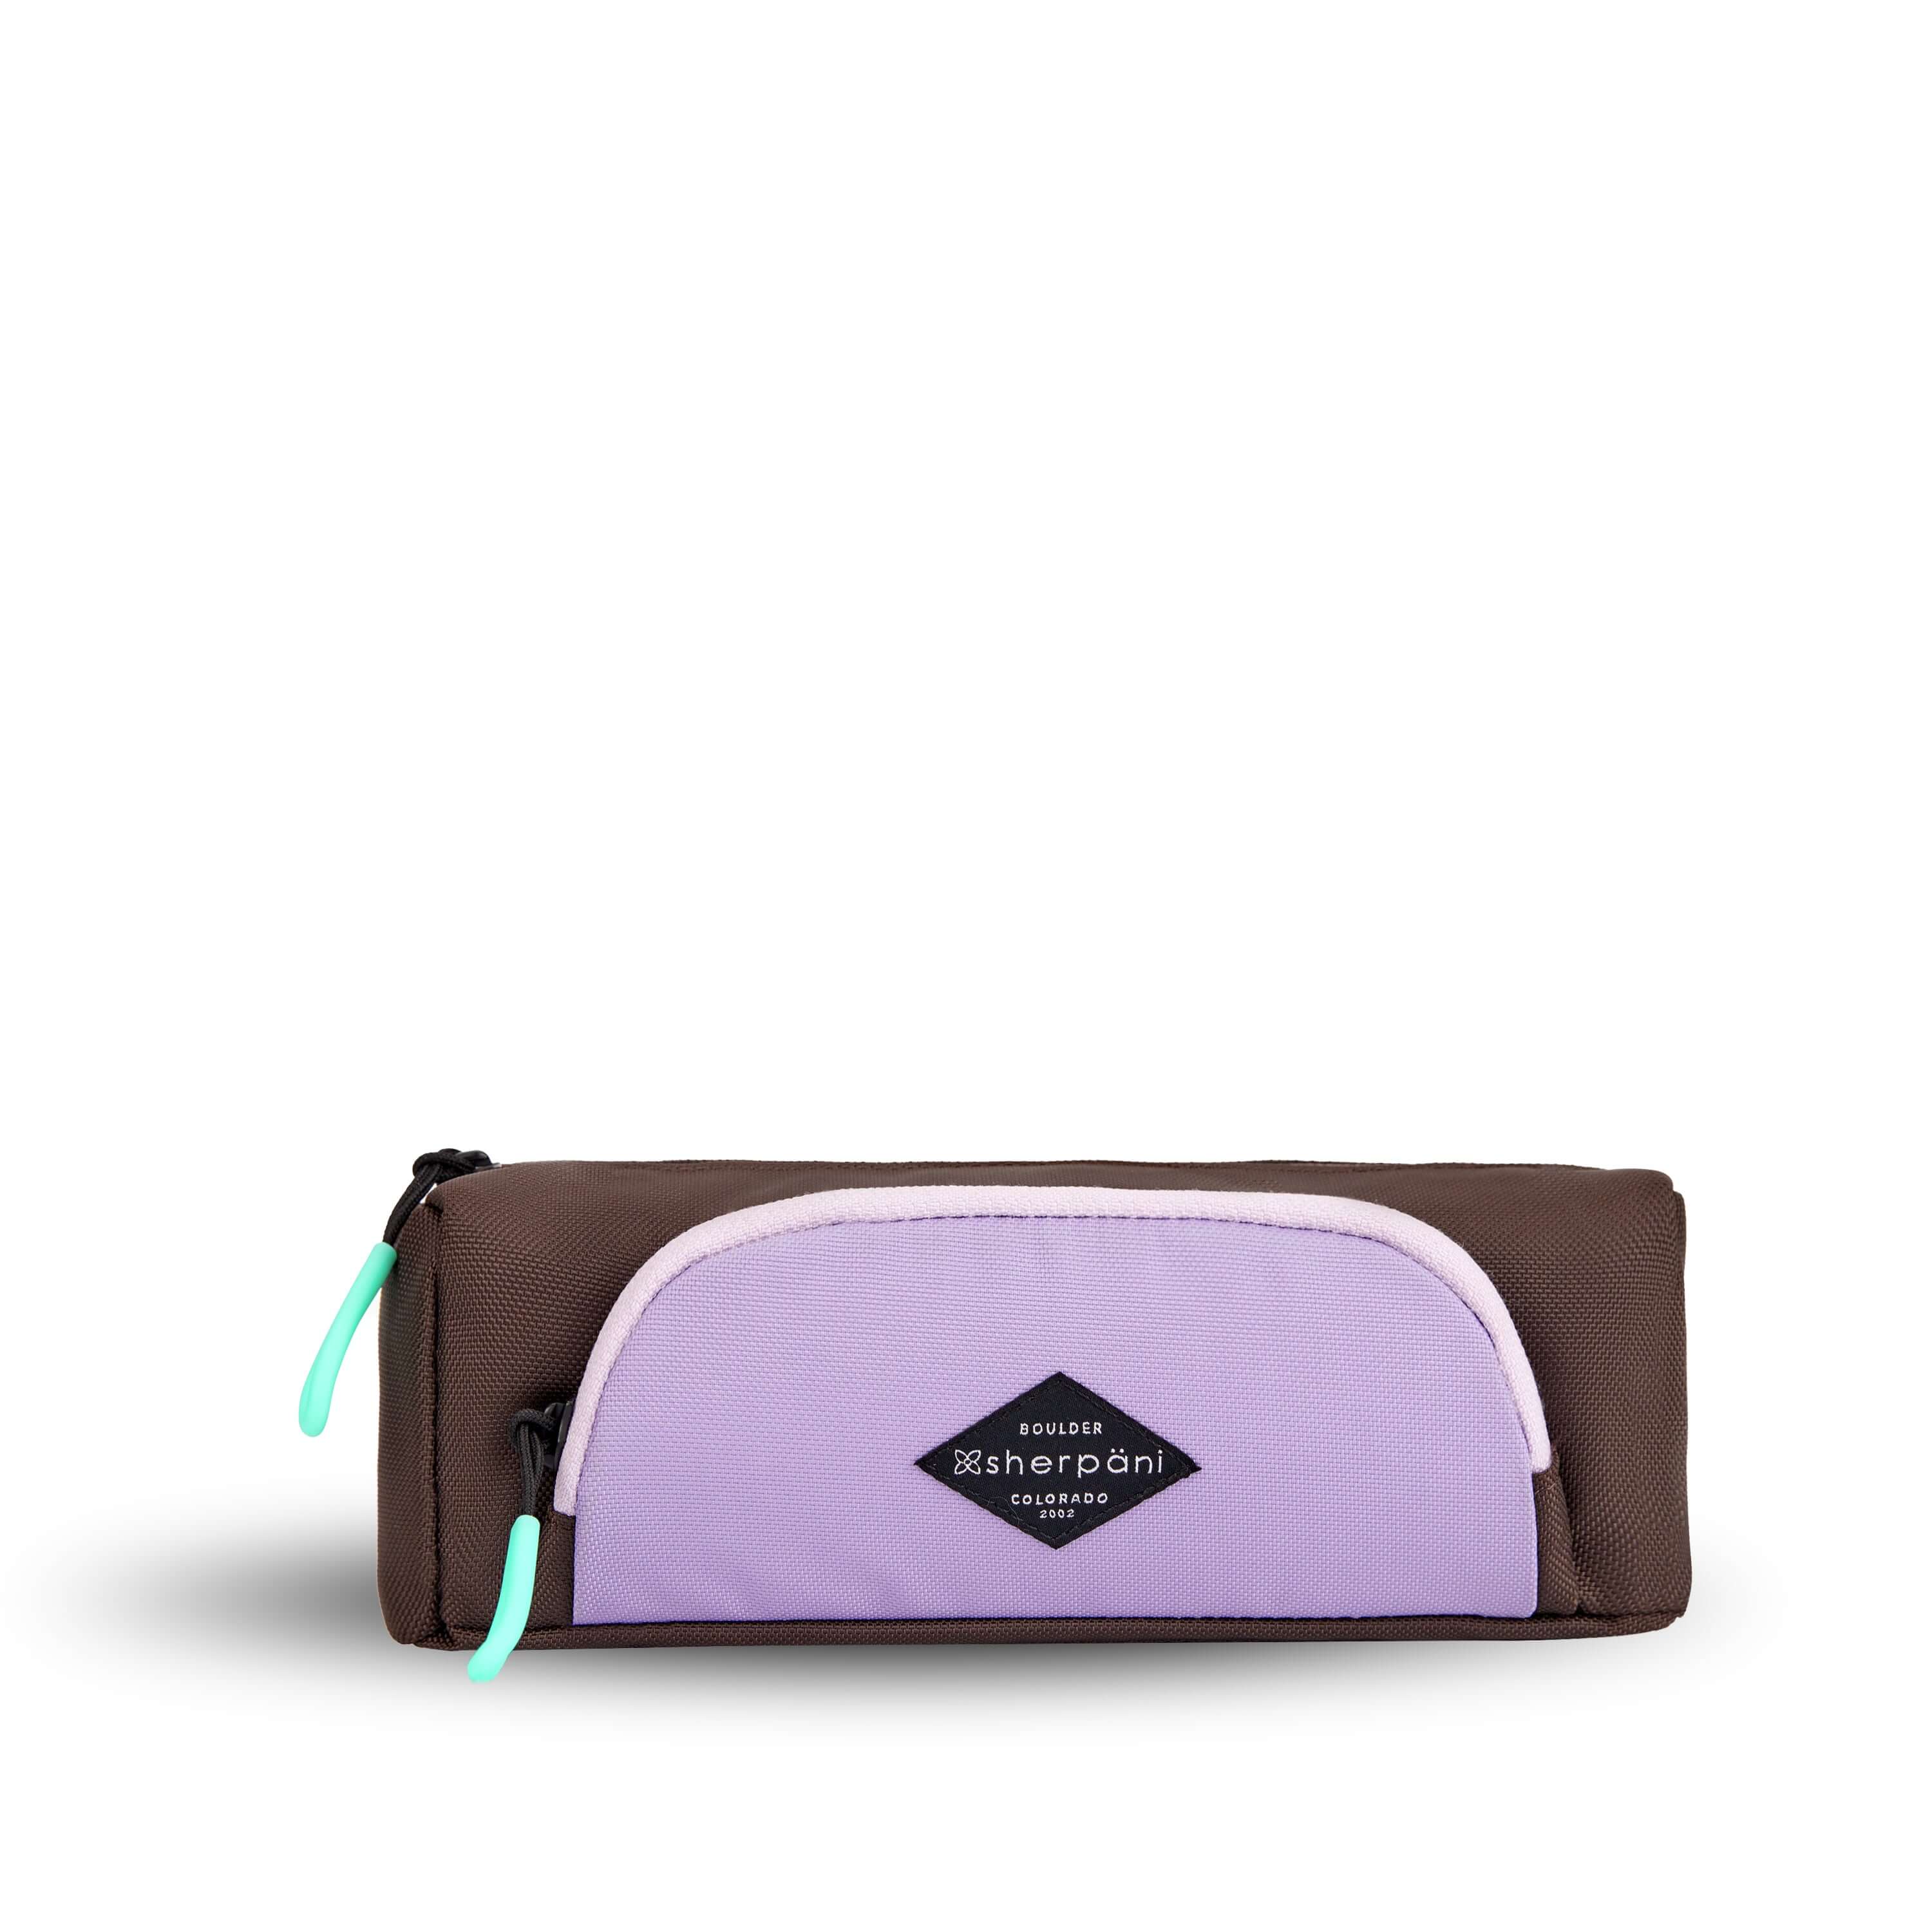 Flat front view of Sherpani travel accessory, the Poet in Lavender. The pouch is two-toned in lavender and brown. There is an external zipper pocket on the front. Easy-pull zippers are accented in aqua. 